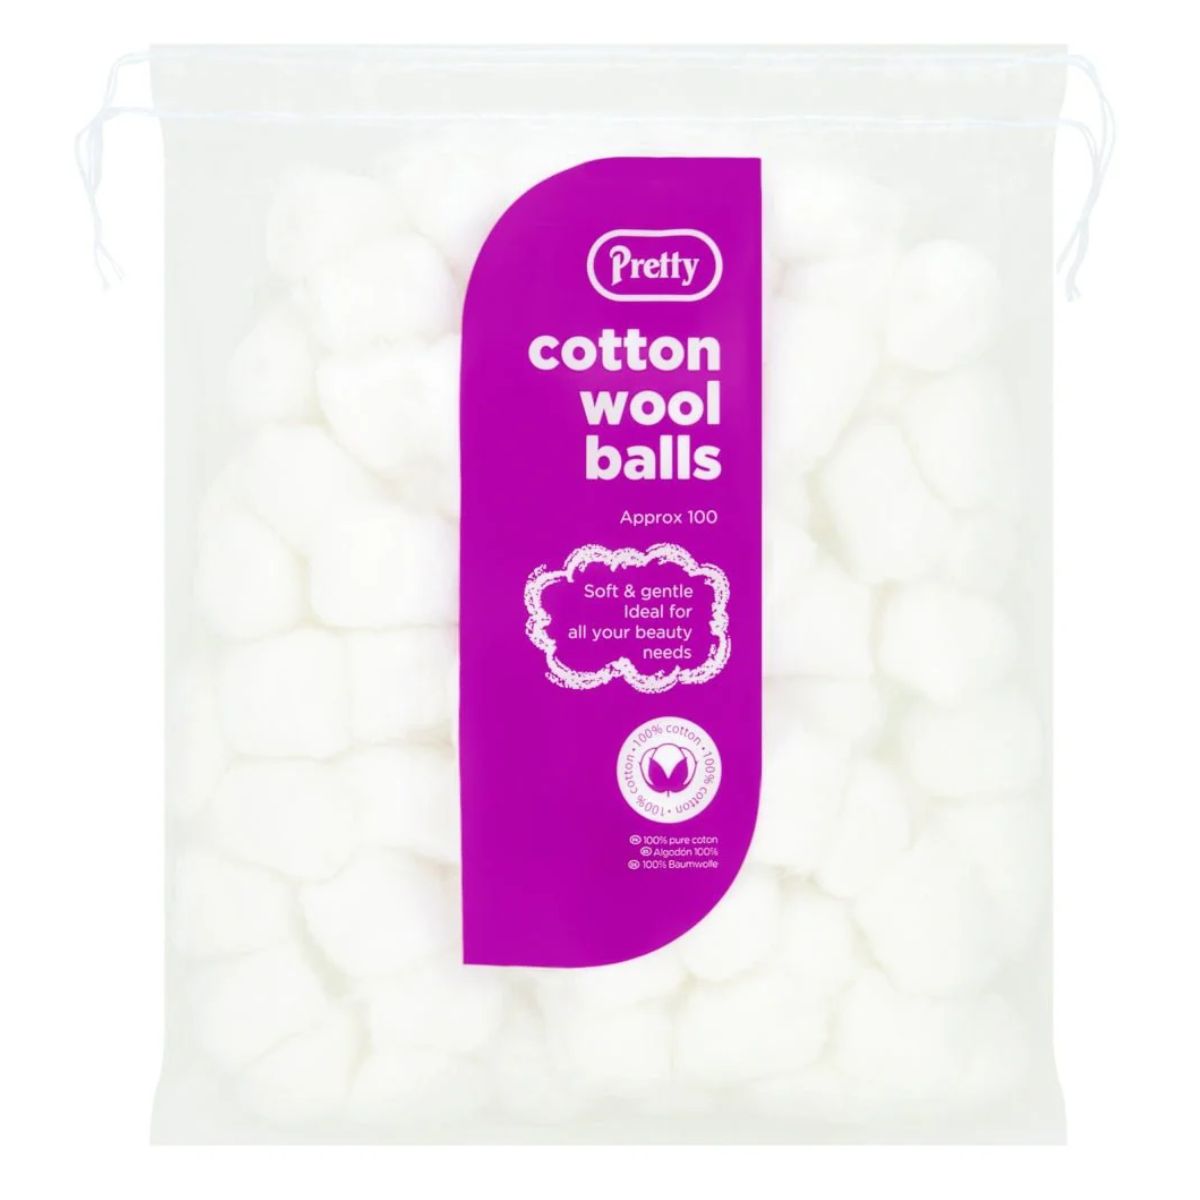 A package of Pretty - Cotton Wool Balls - 100pcs, approximately 100 count, advertised as soft and gentle for beauty needs.